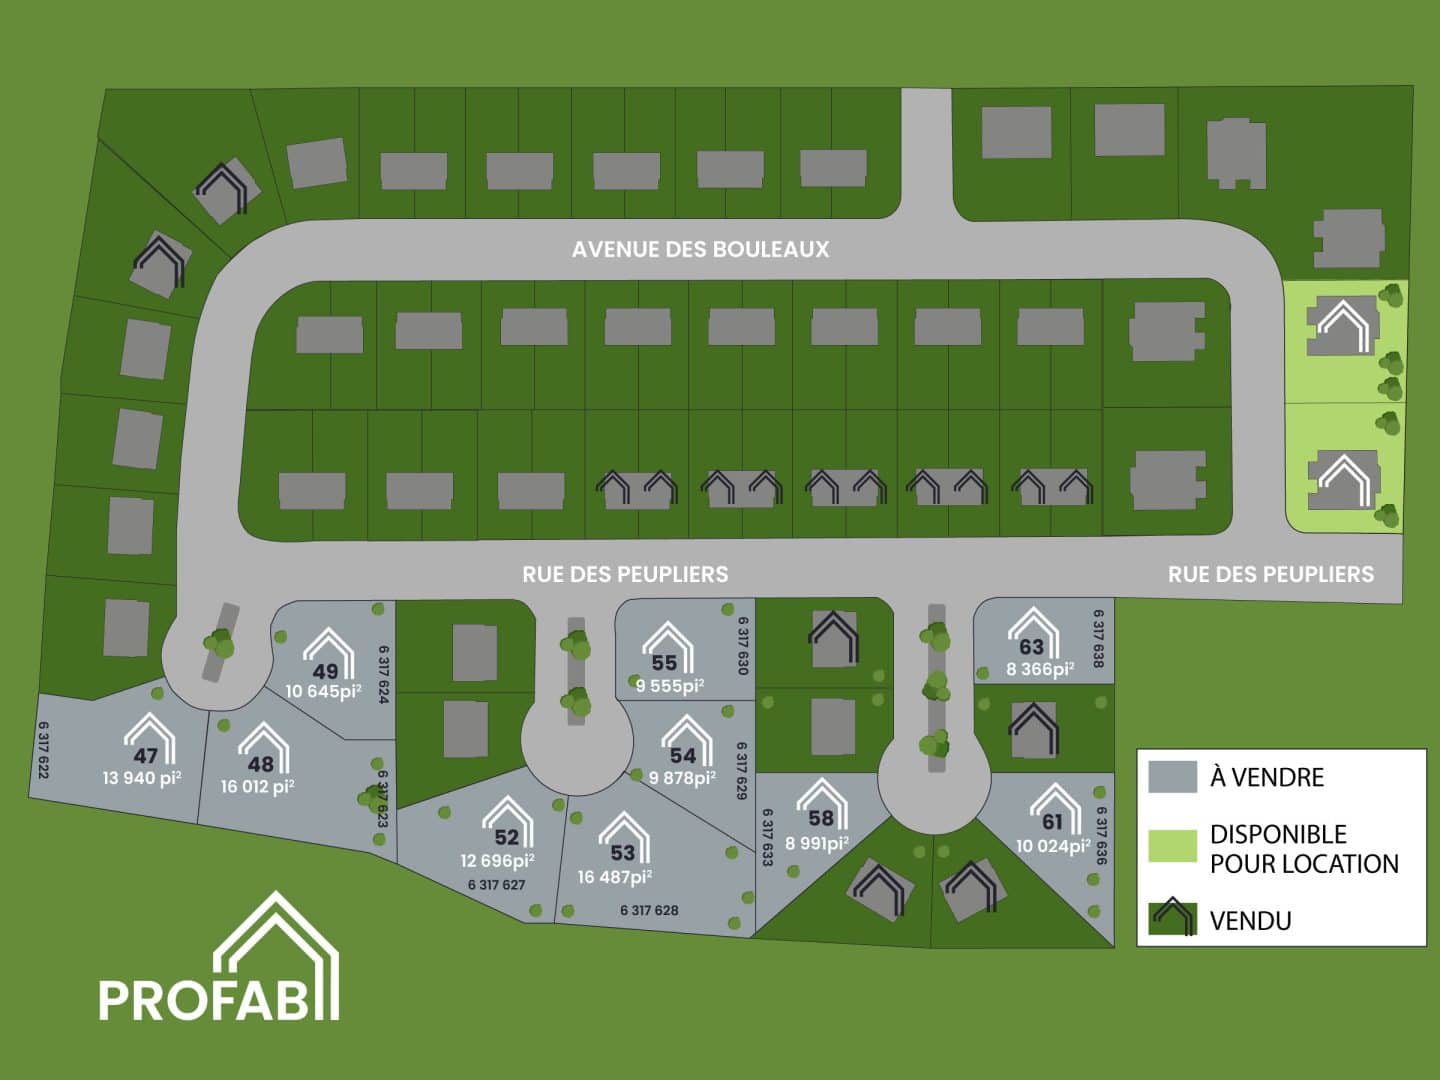 Vallée jonction 2D subdivision plan. Vacant lot number 61 for sale.